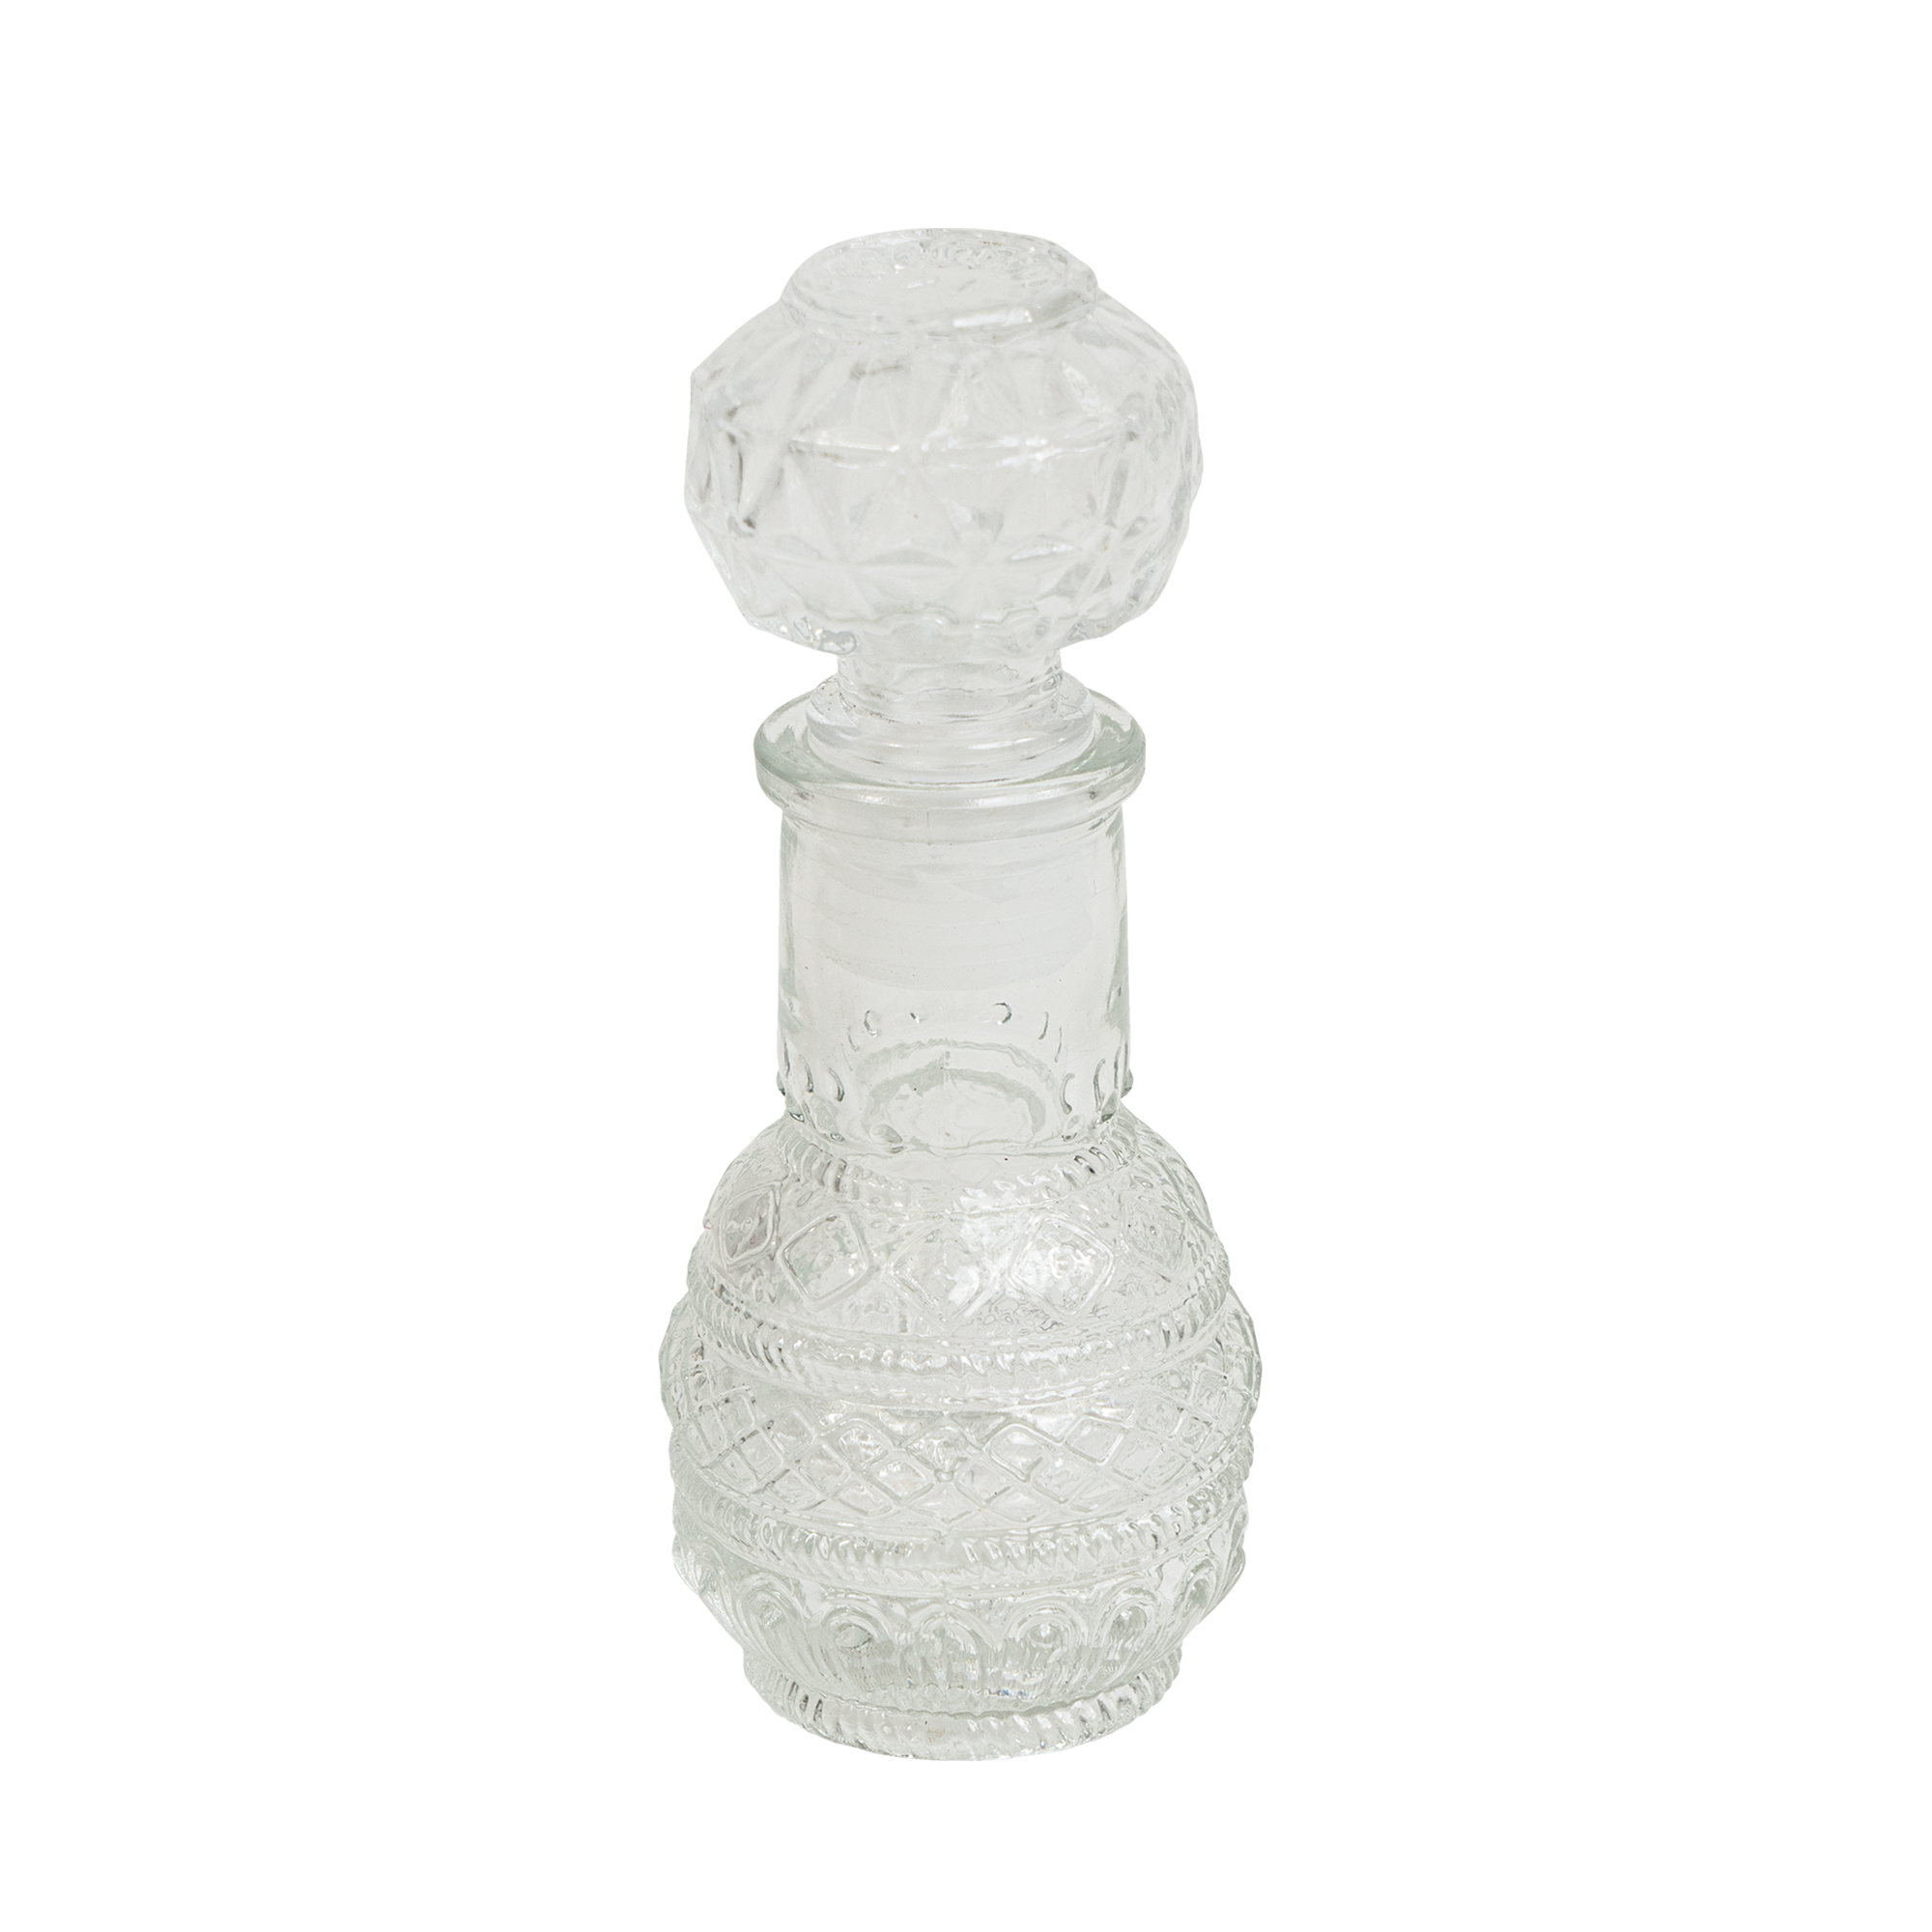 Glass Bottle with Cap 50ml